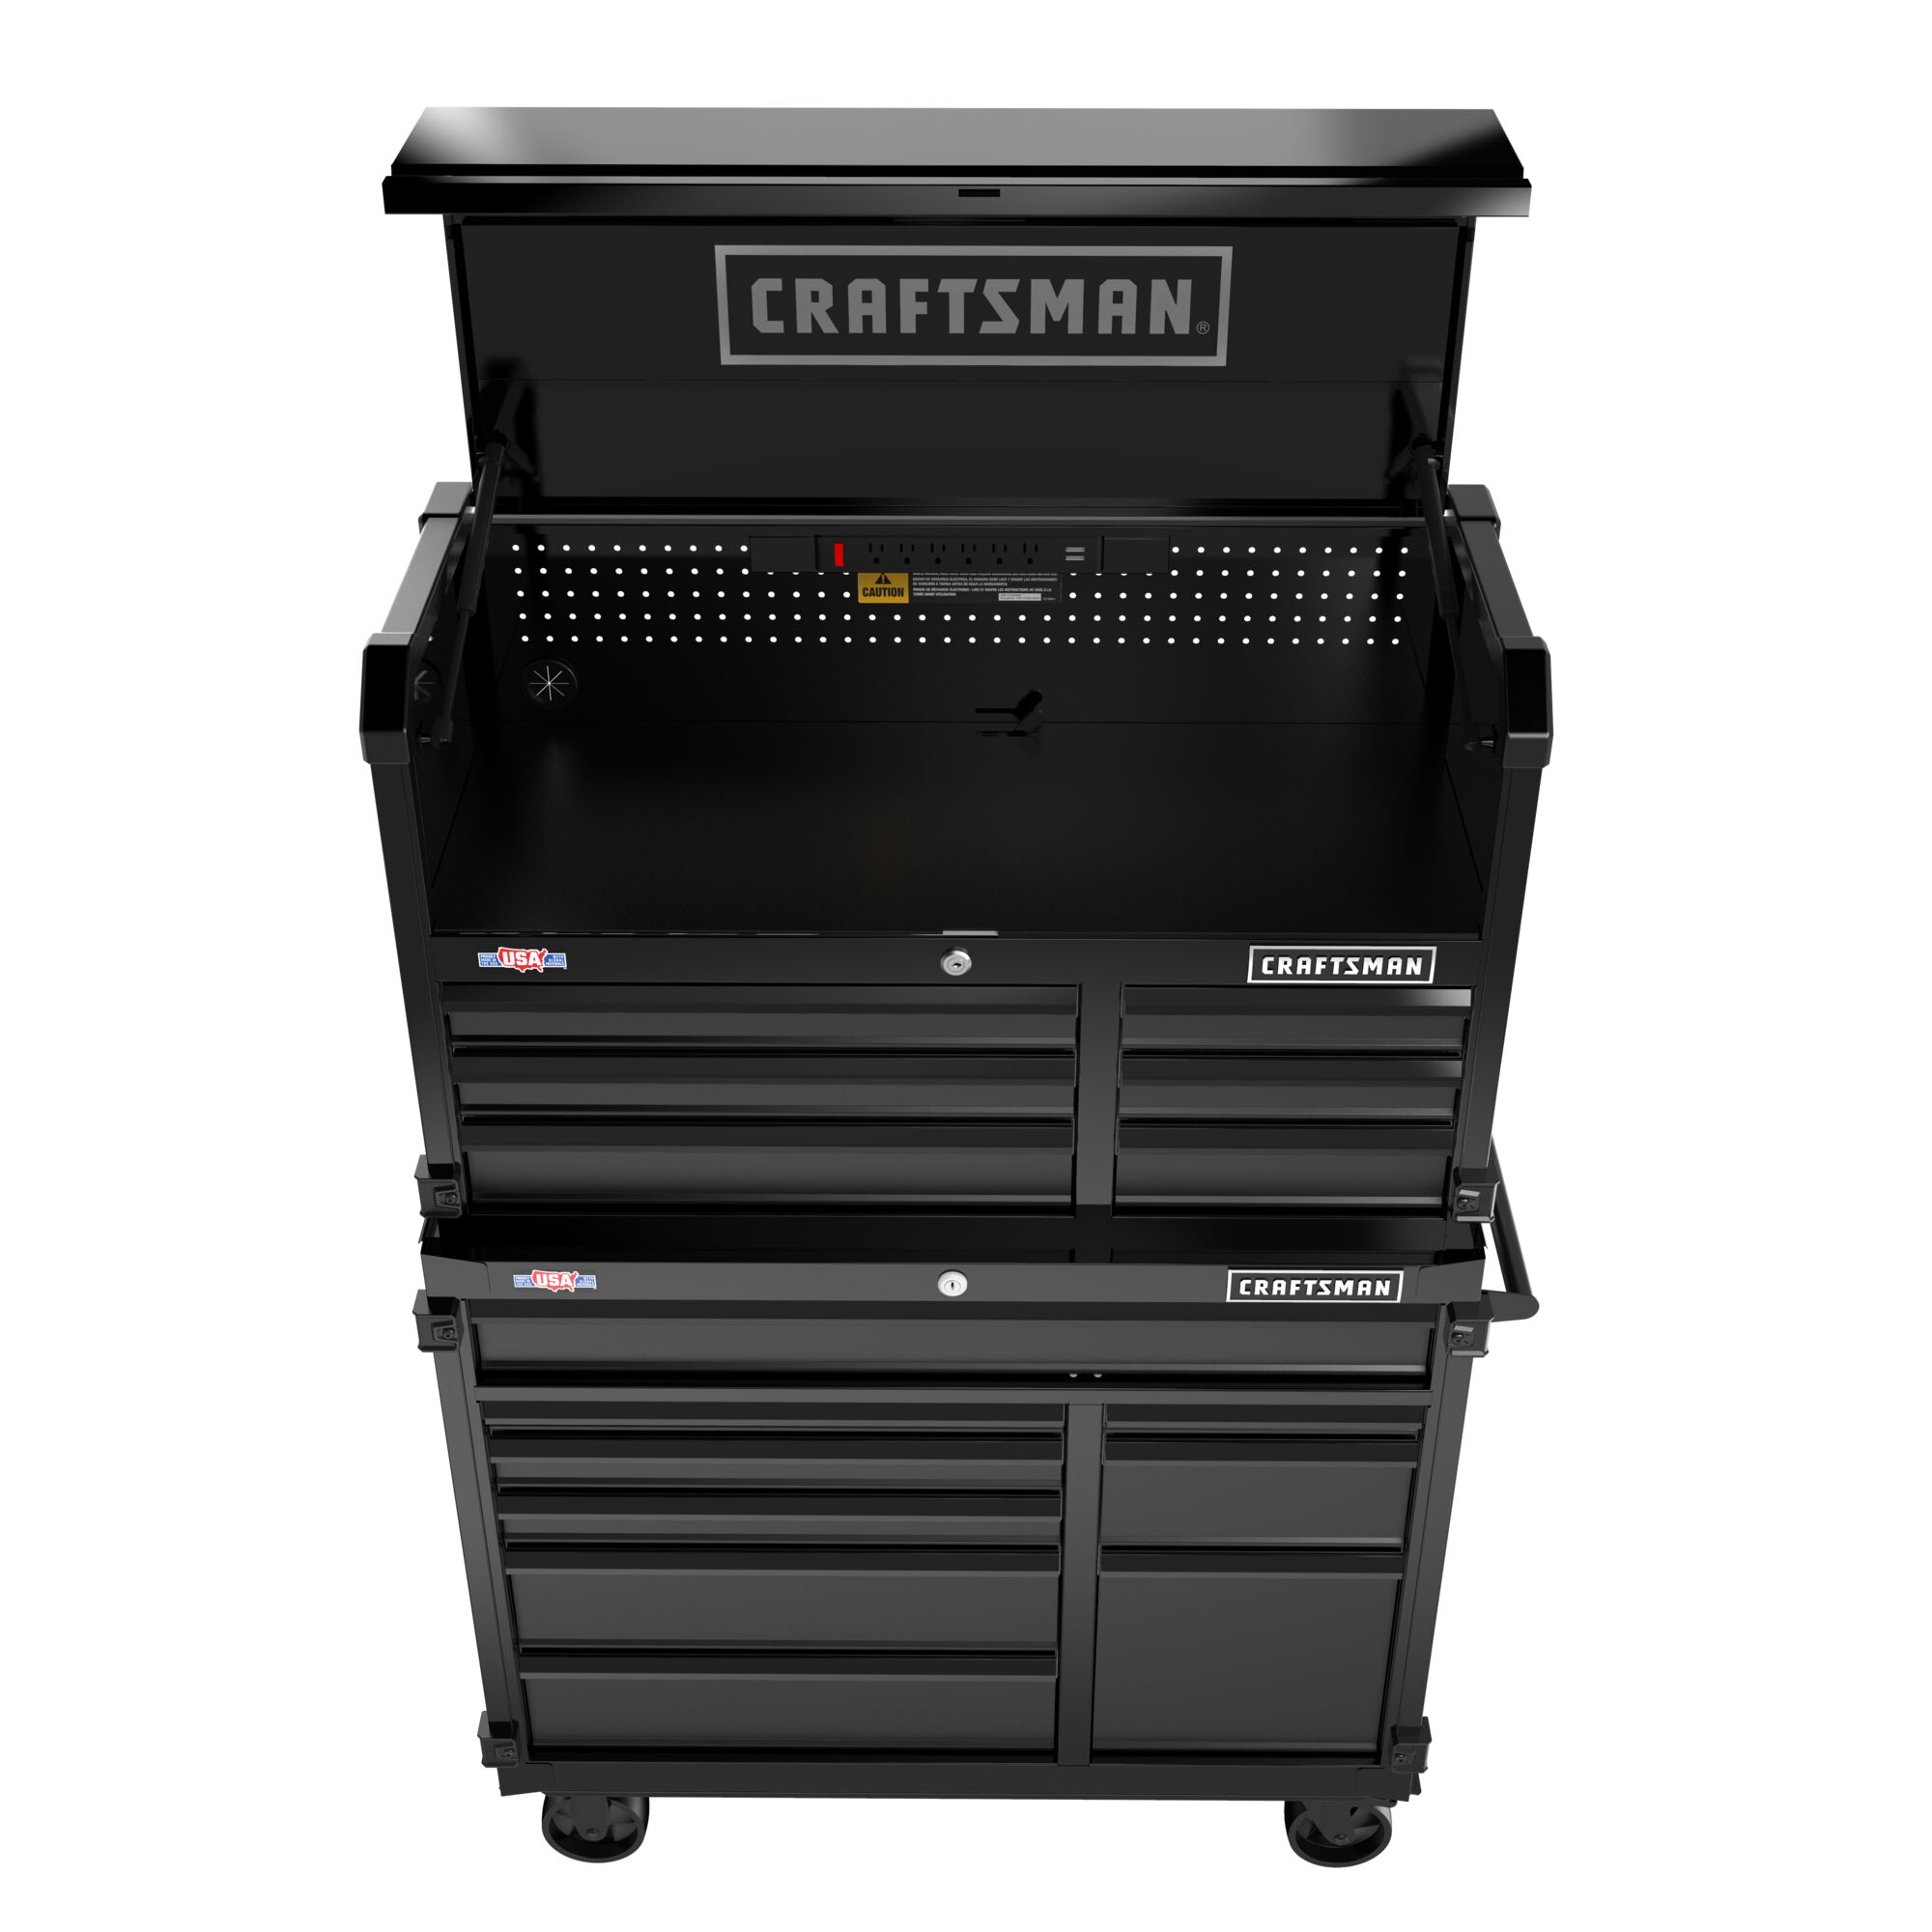 CRAFTSMAN Premium S2000 Series 52-inch Wide 7-Drawer Tool Chest with lid open, looking down